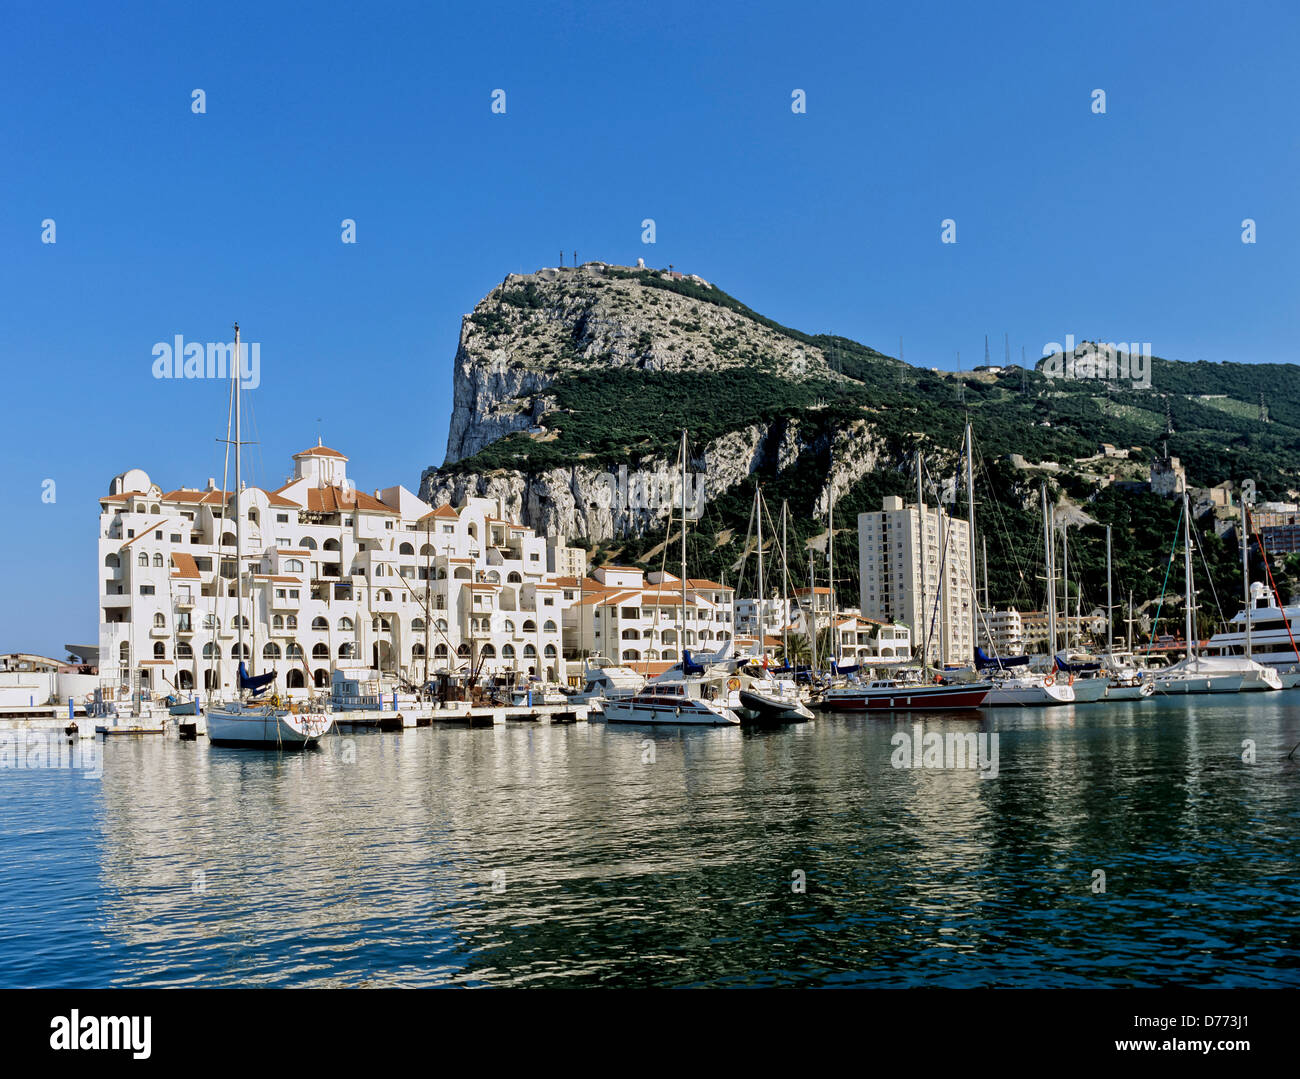 8702. The Rock from the Marina, Gibraltar, Europe Stock Photo